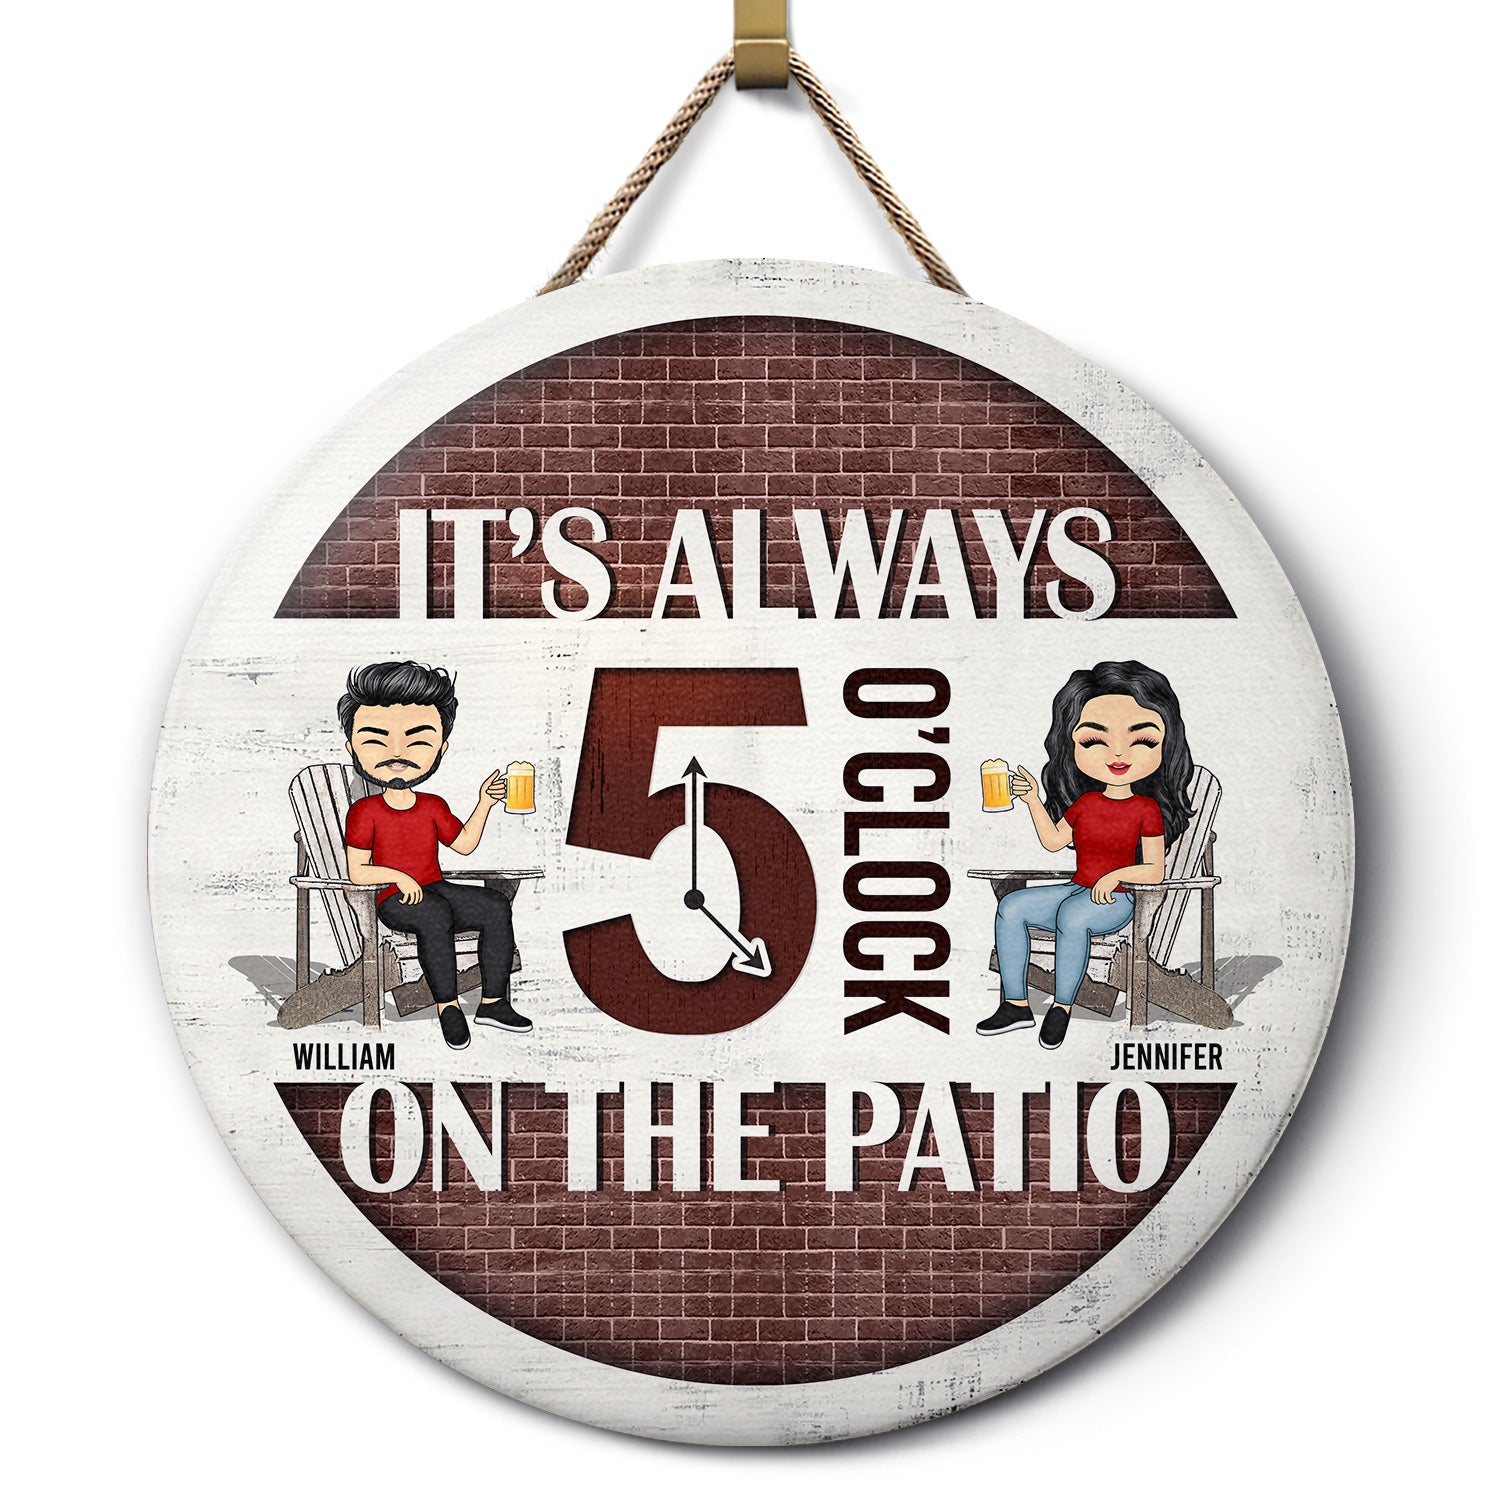 It's Always 5 O’clock - Home Decor For Patio, Pool, Deck, Bar - Personalized Custom Wood Circle Sign